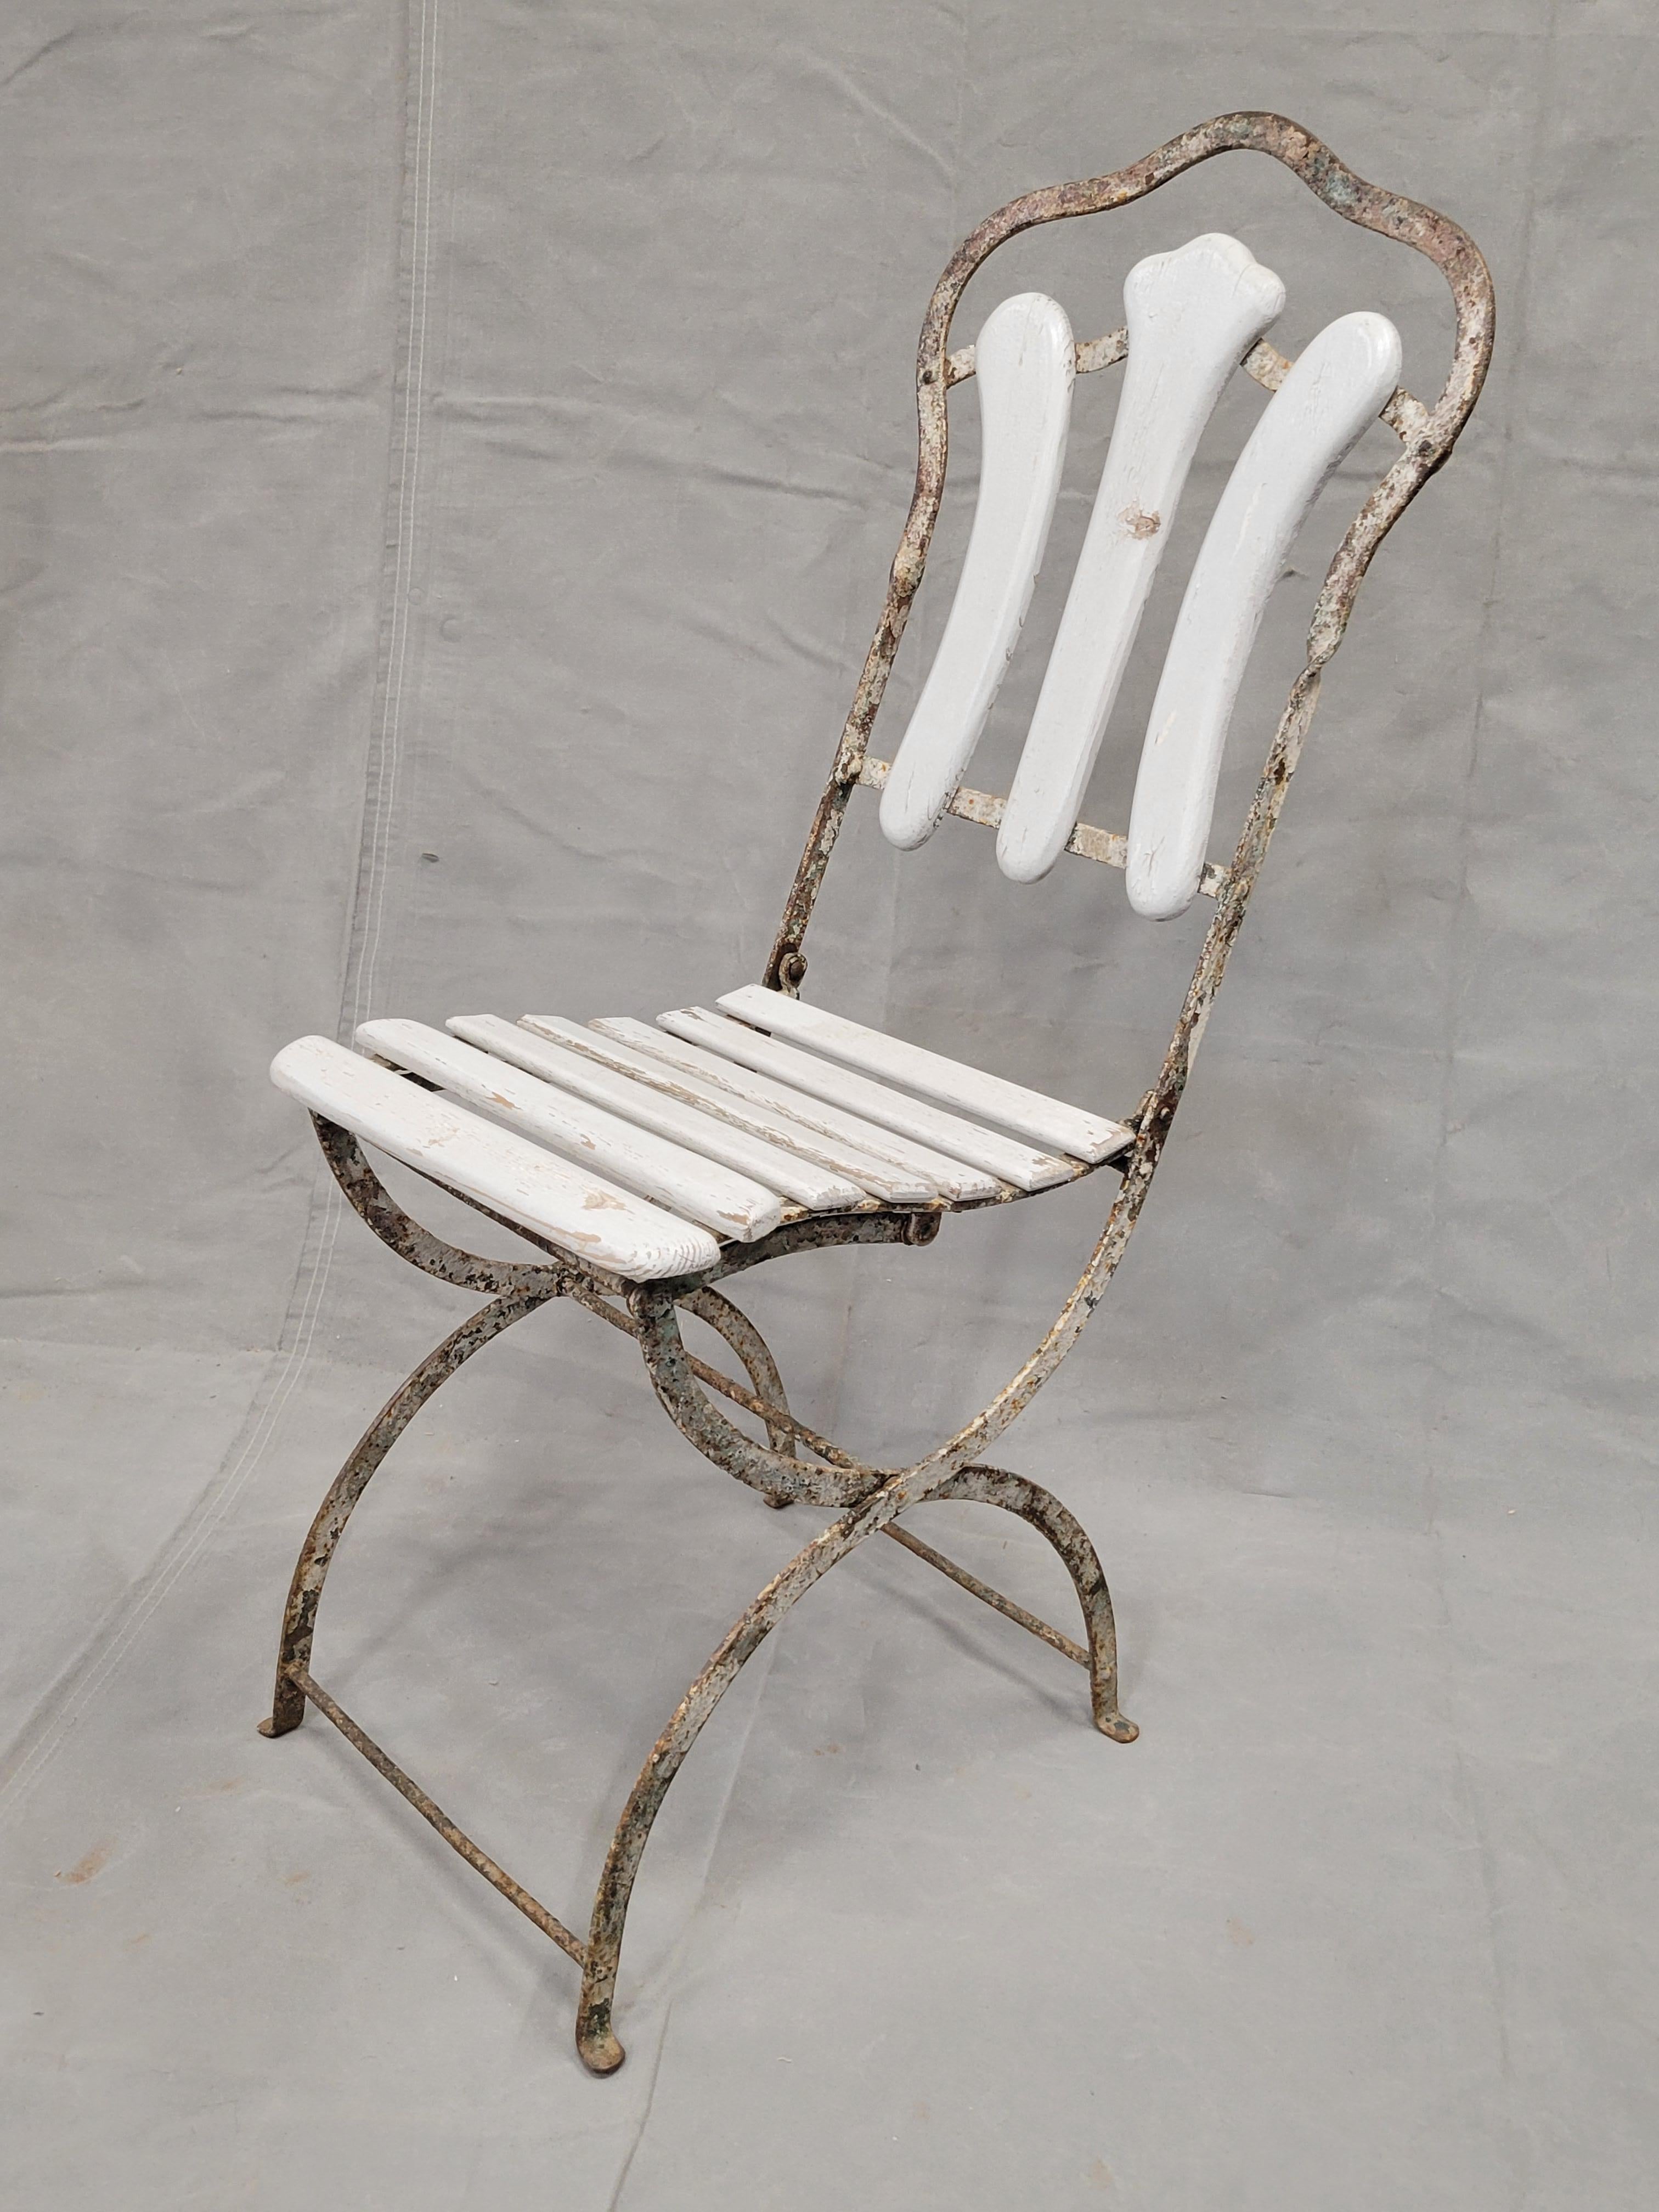 Art Nouveau Antique French Iron and Wood Folding Bistro Garden Chairs - Set of 3 For Sale